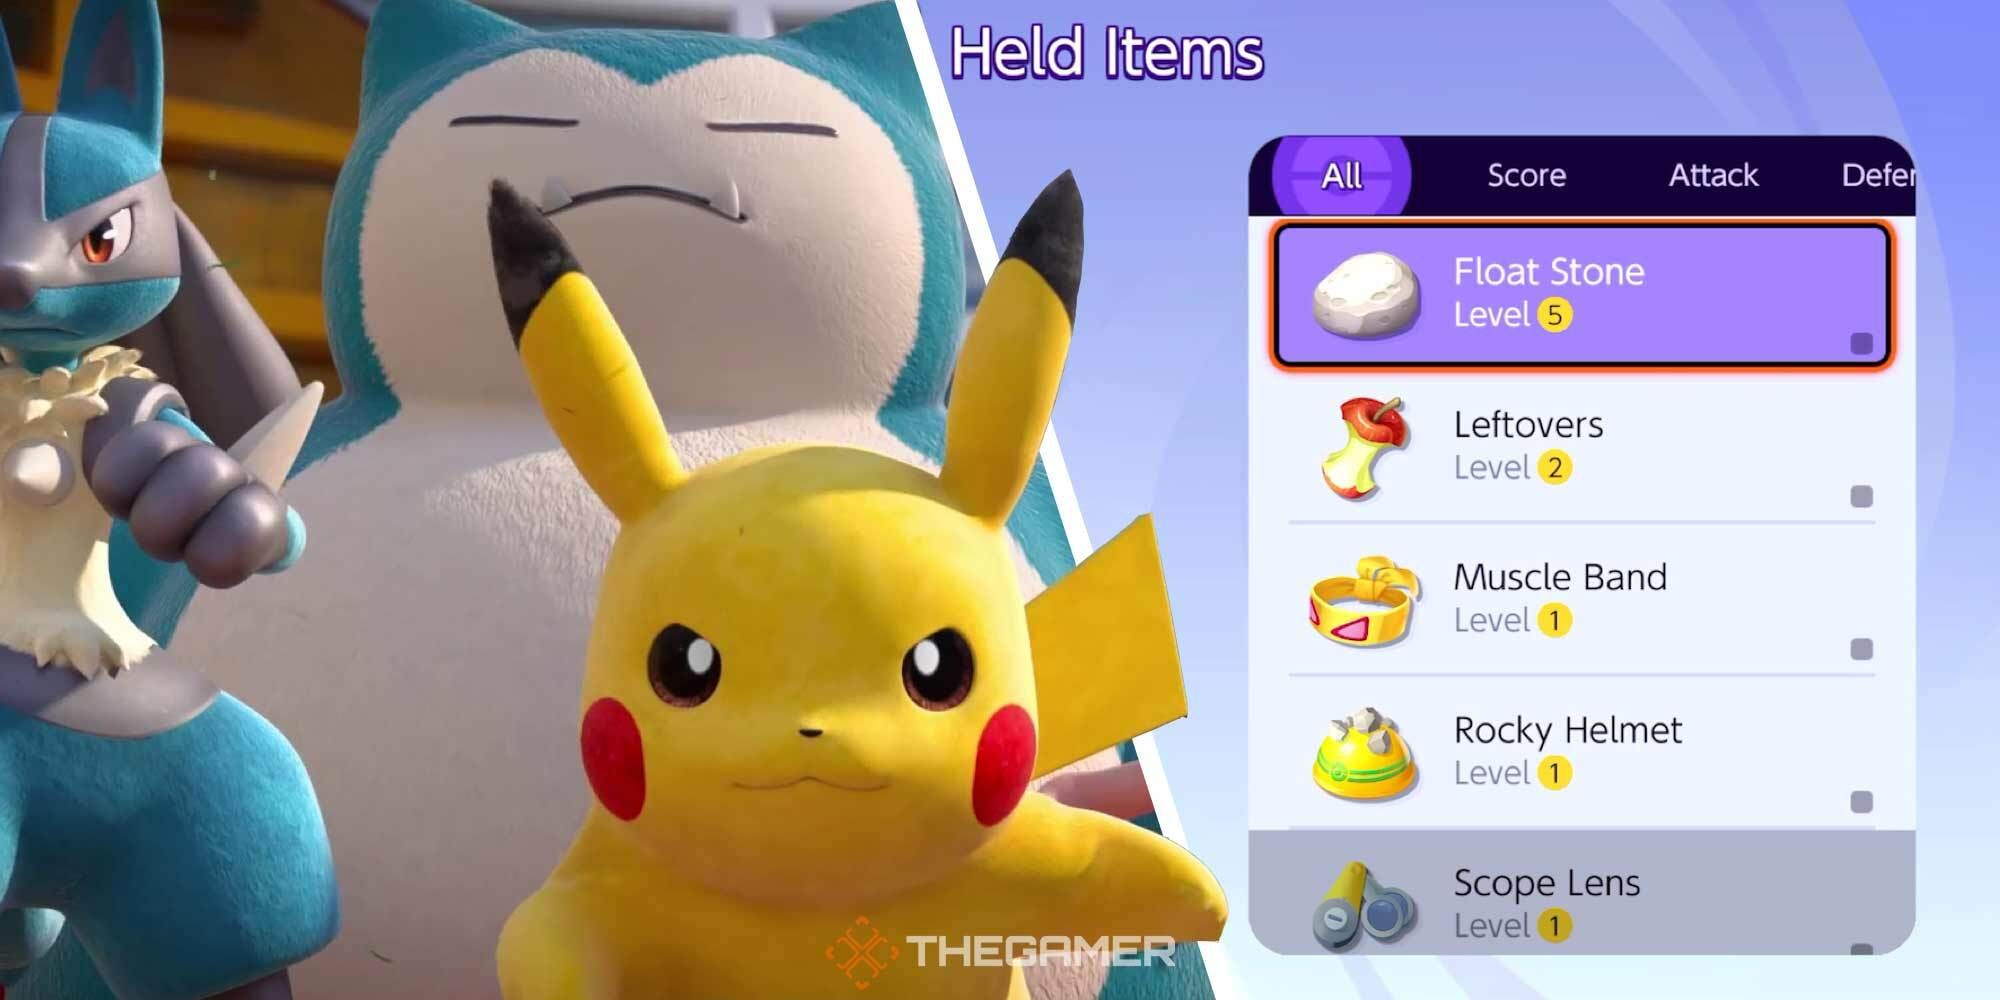 Pokemon UNITE faces backlash over microtransactions, things it can fix